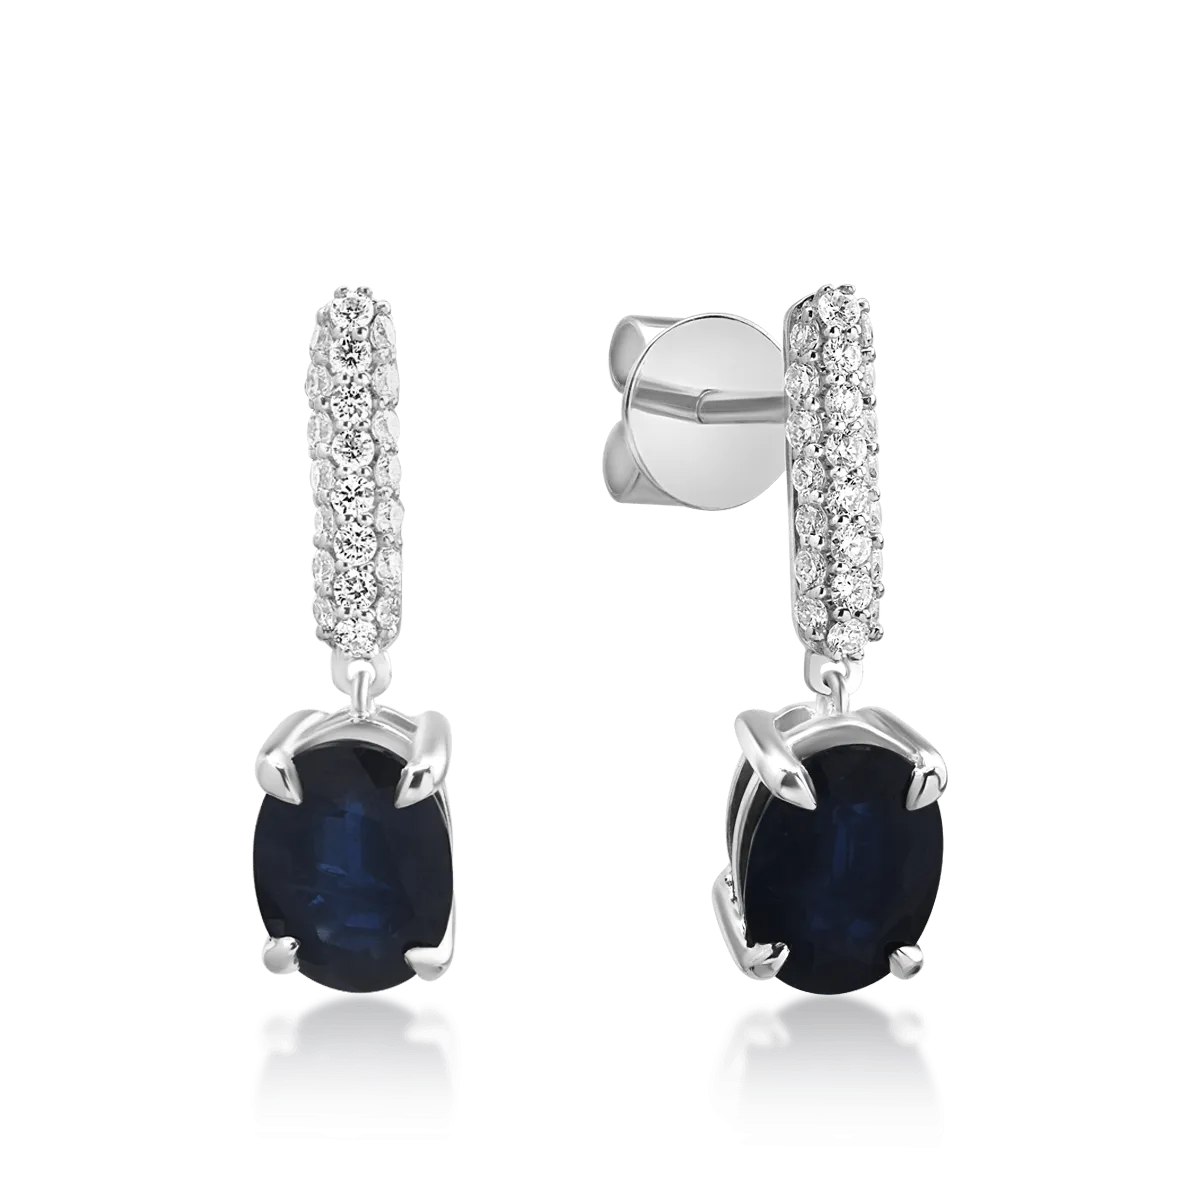 18K white gold earrings with 2.019ct sapphires and 0.221ct diamonds